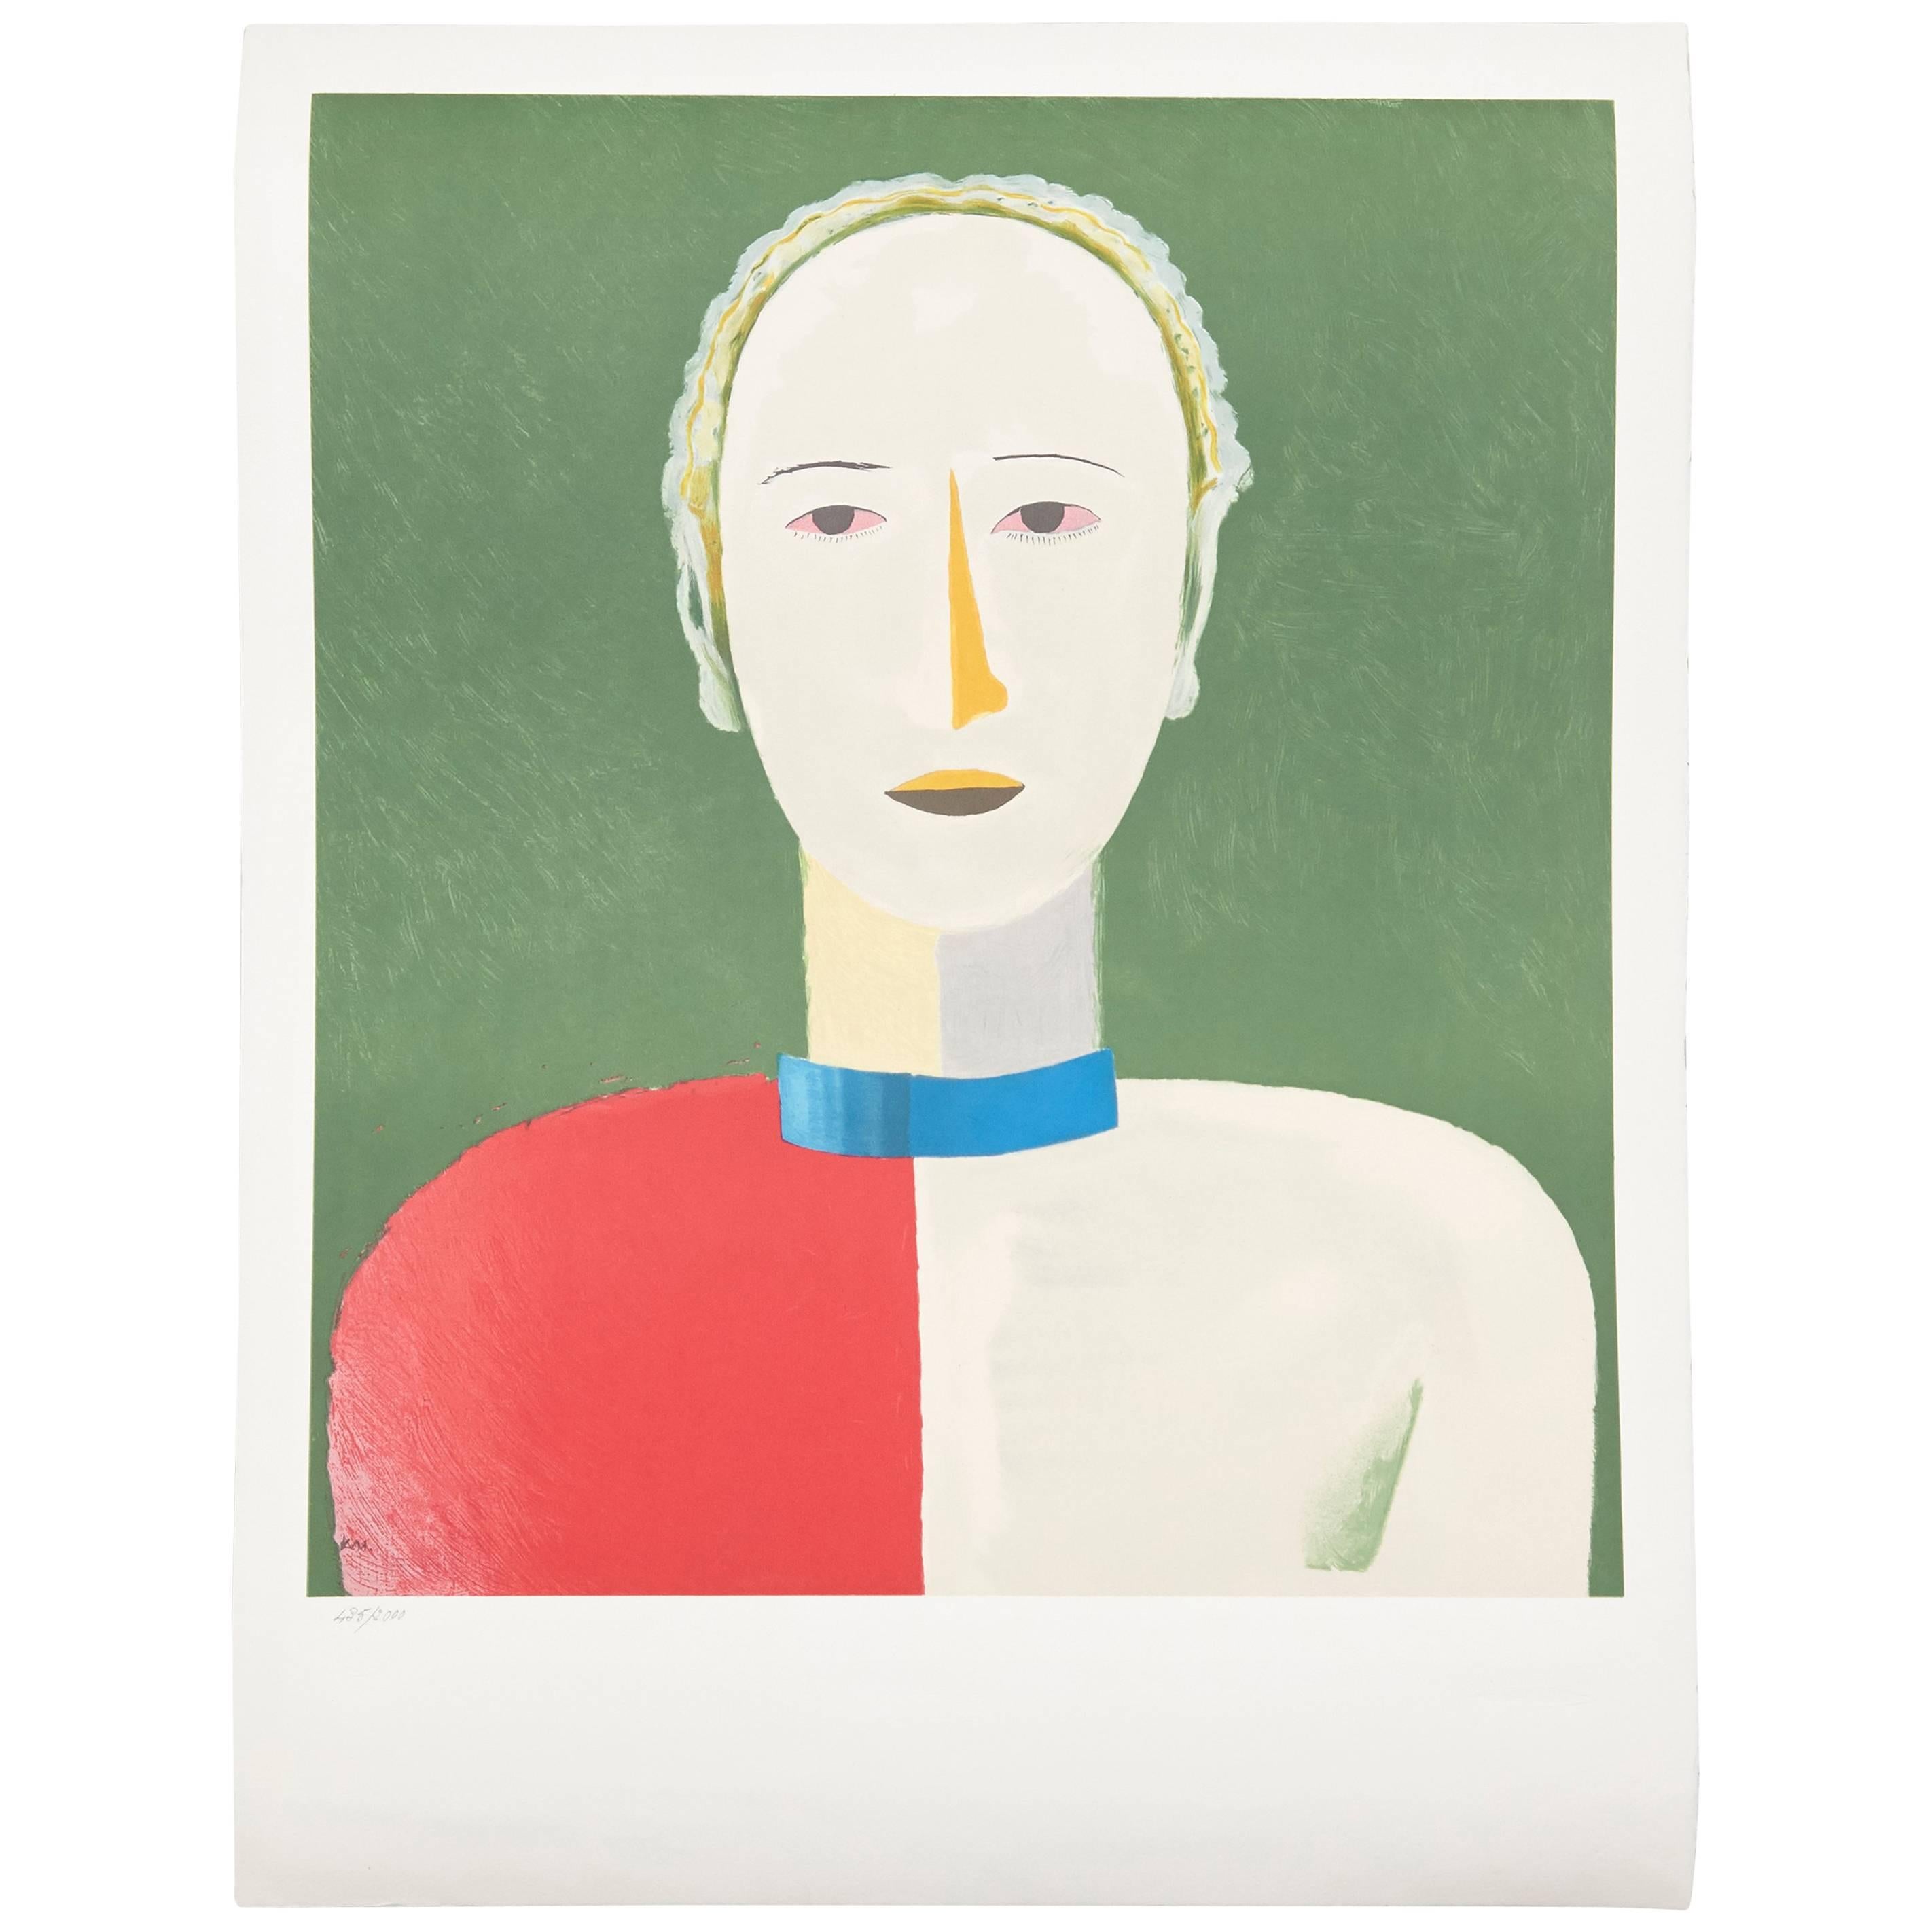 Malevich "Portrait of a Female" Lithography